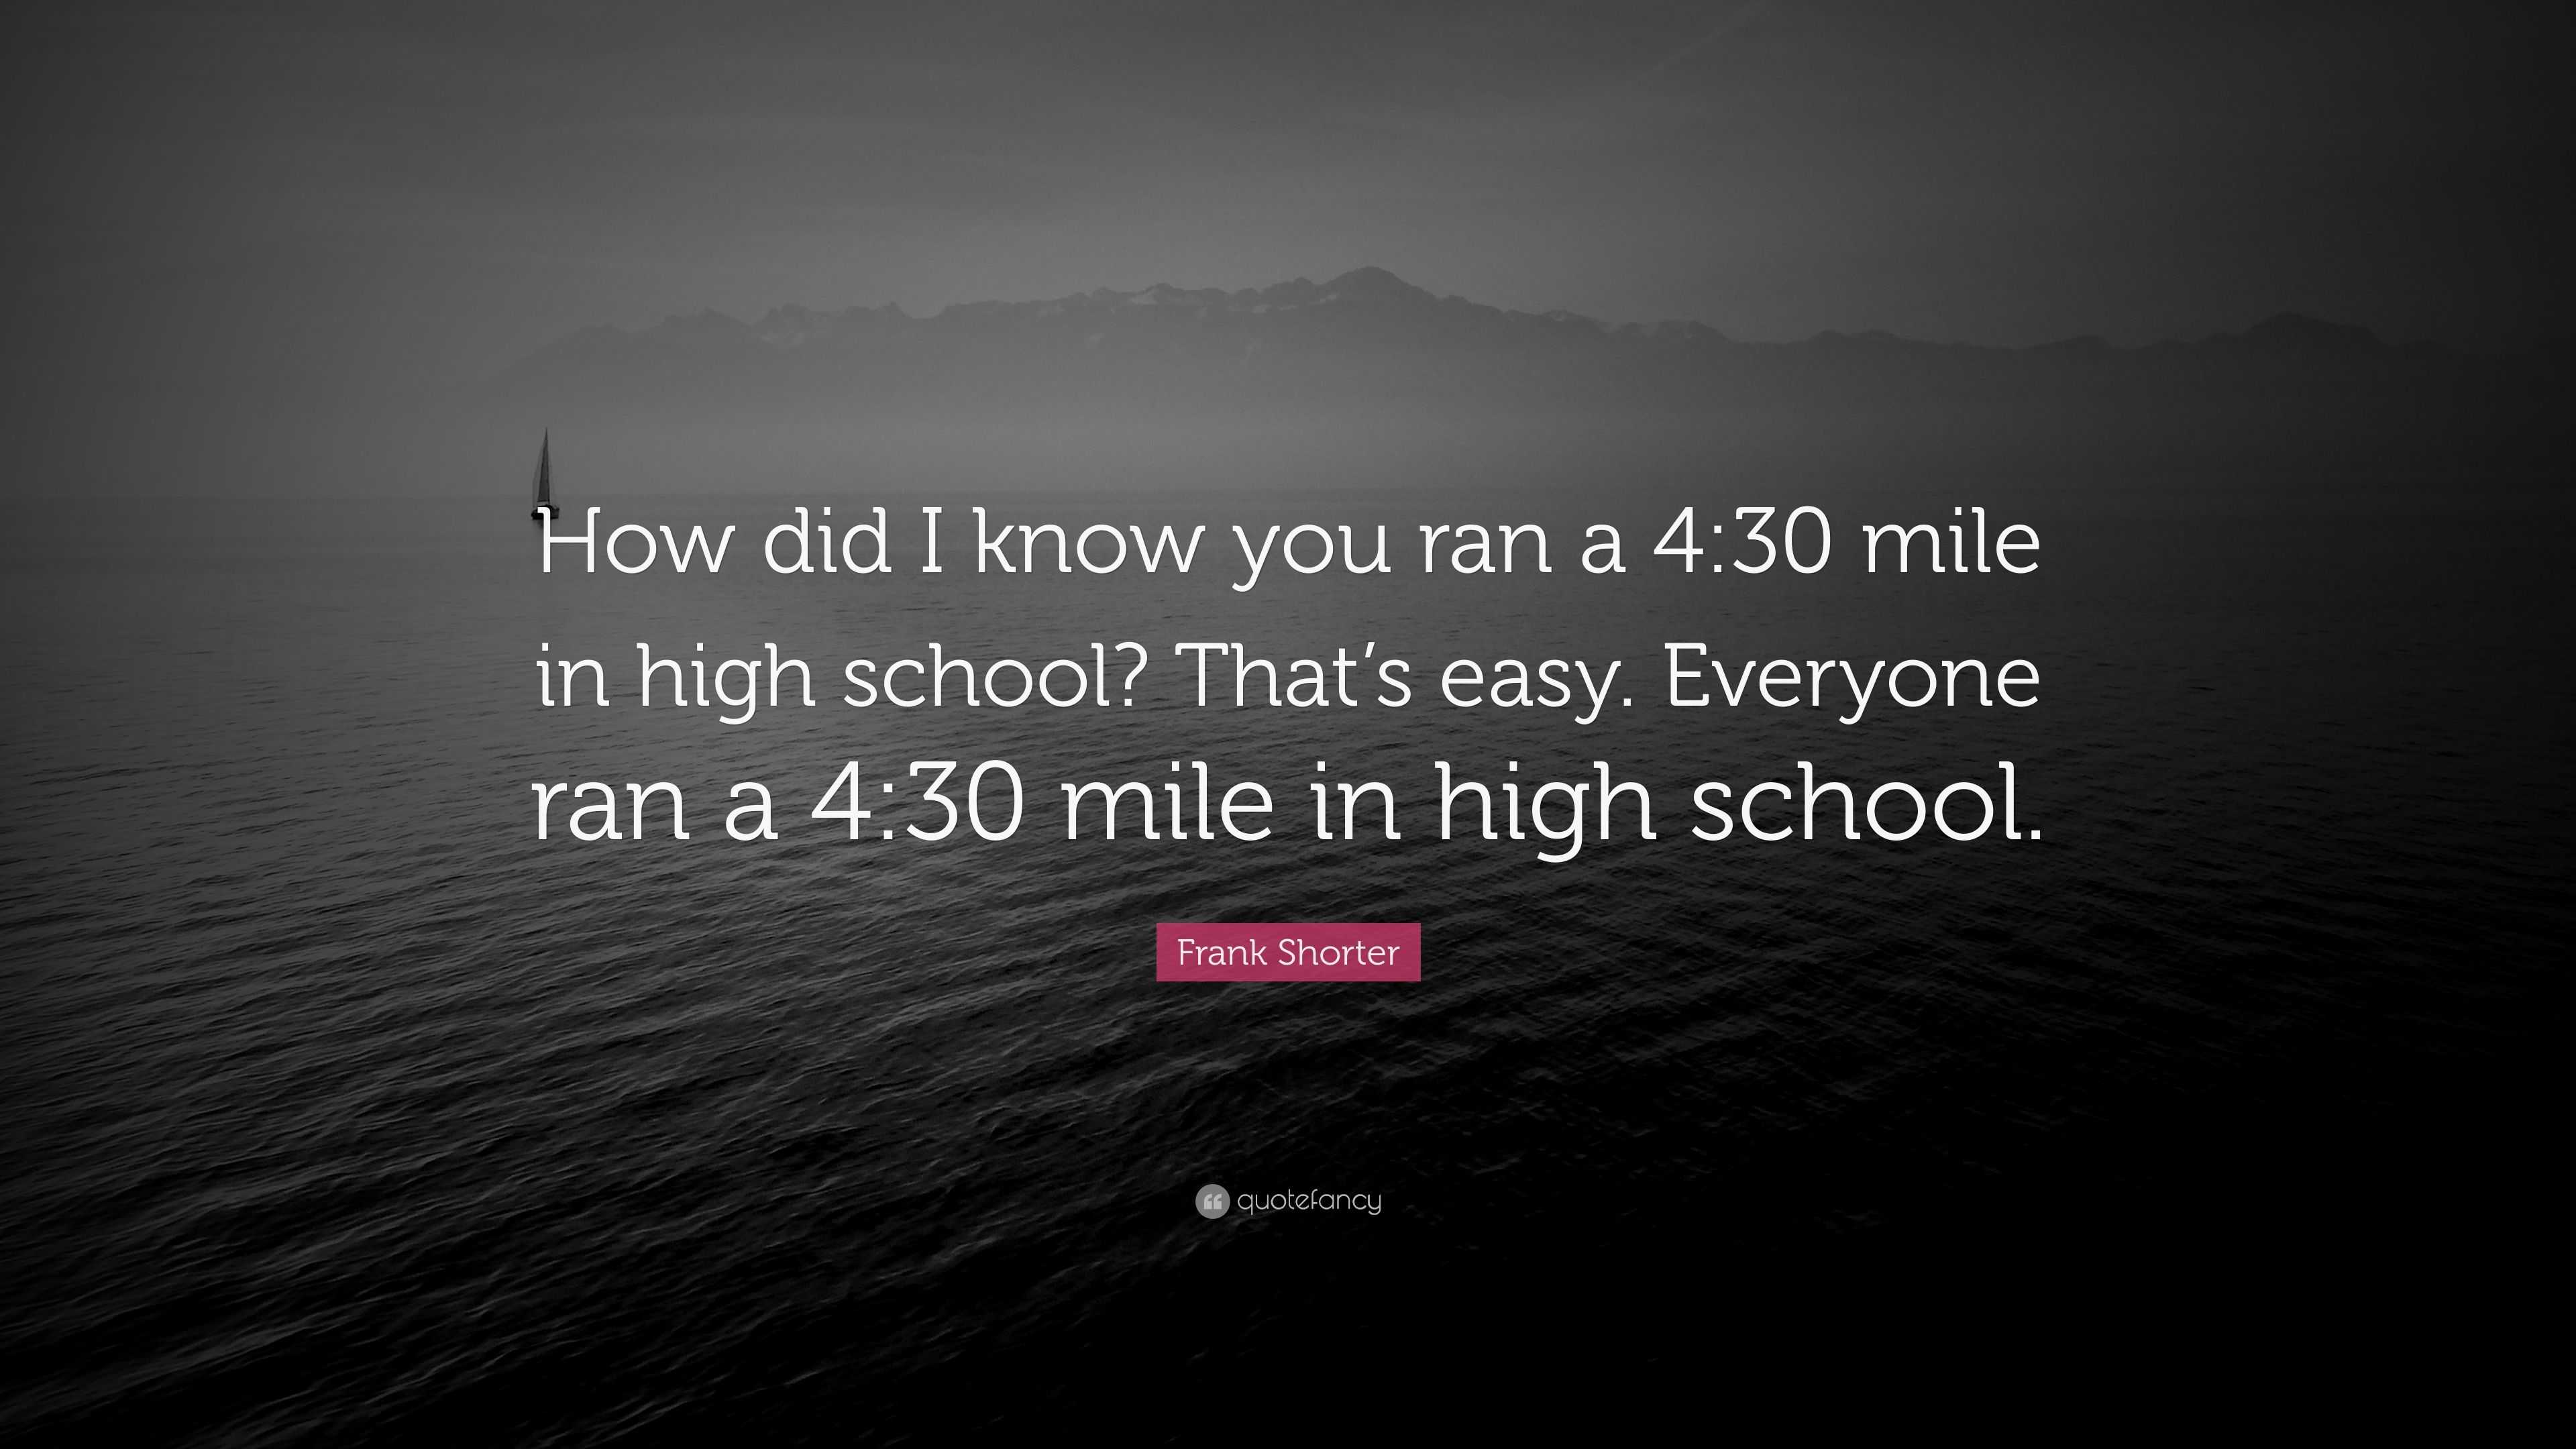 Frank Shorter Quote: "How did I know you ran a 4:30 mile ...